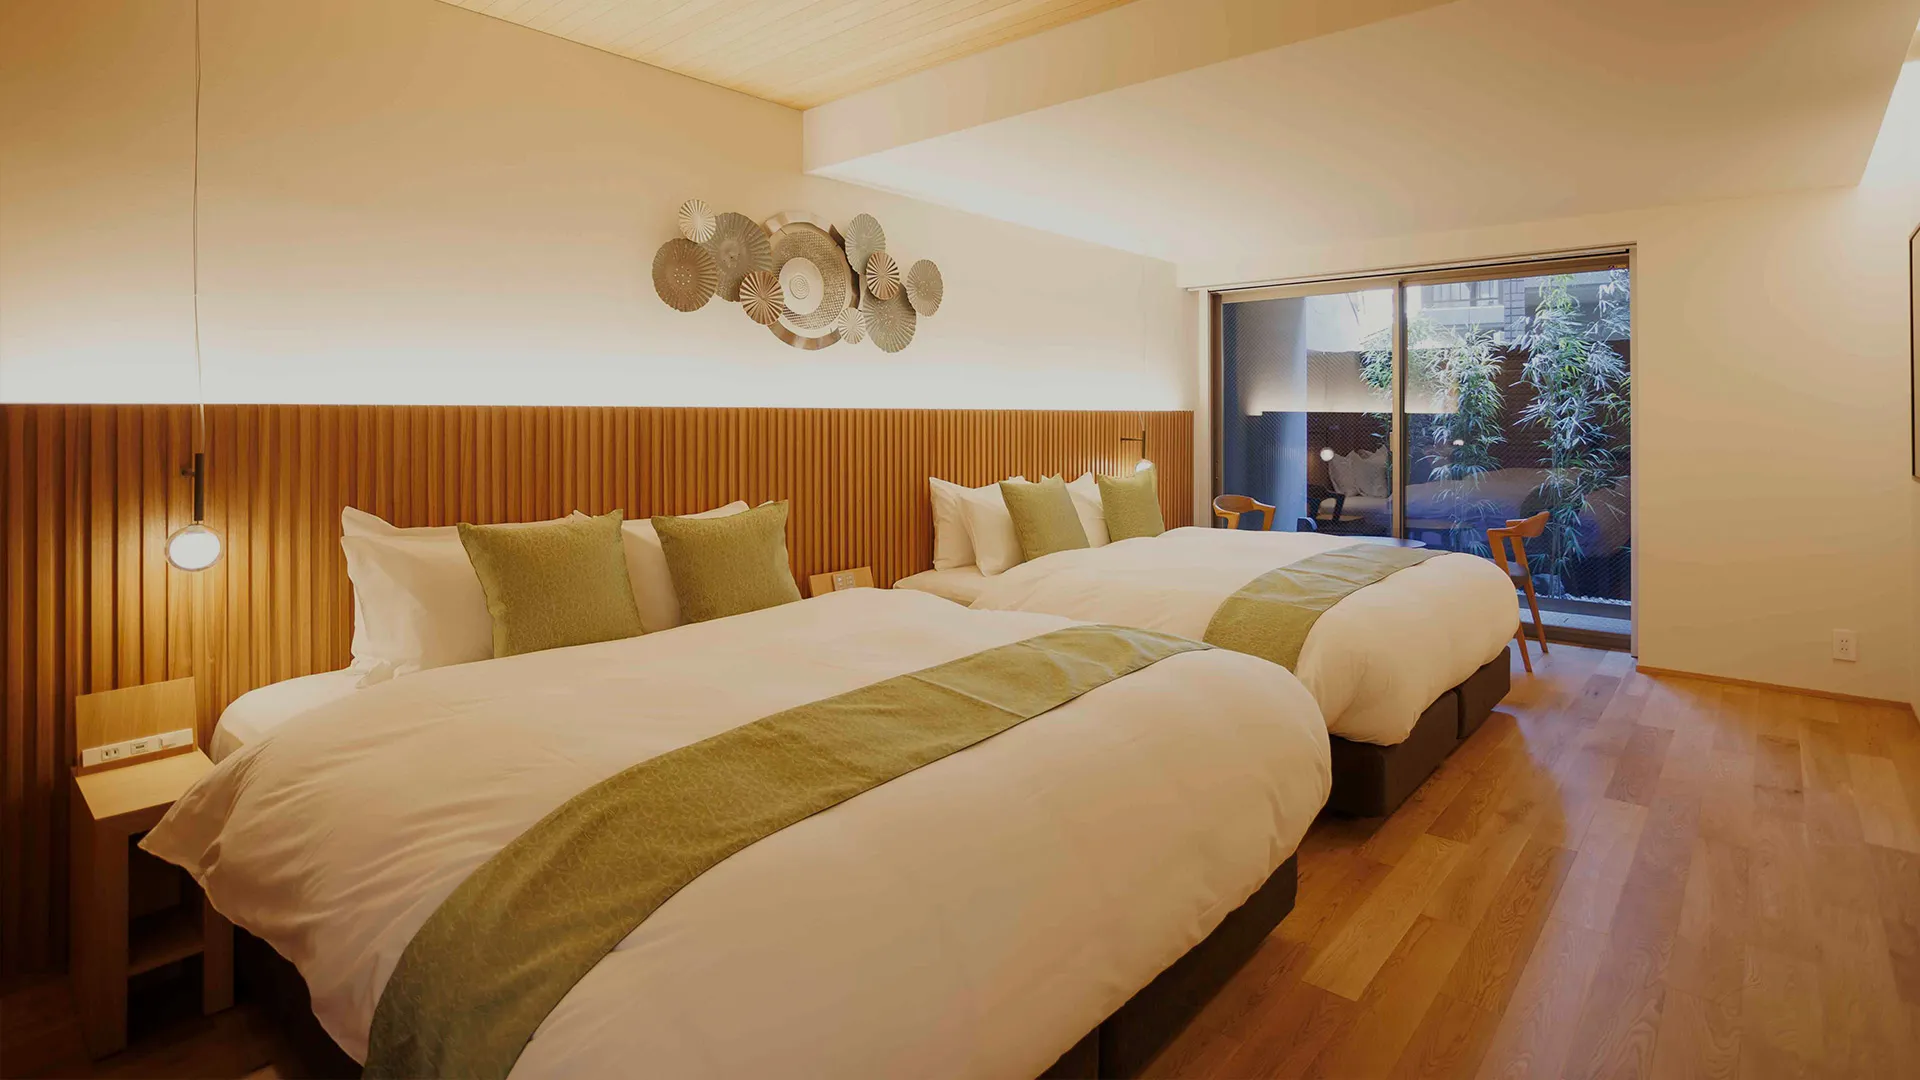 Inside a guest bedroom with two large beds and wooden floor leading to window